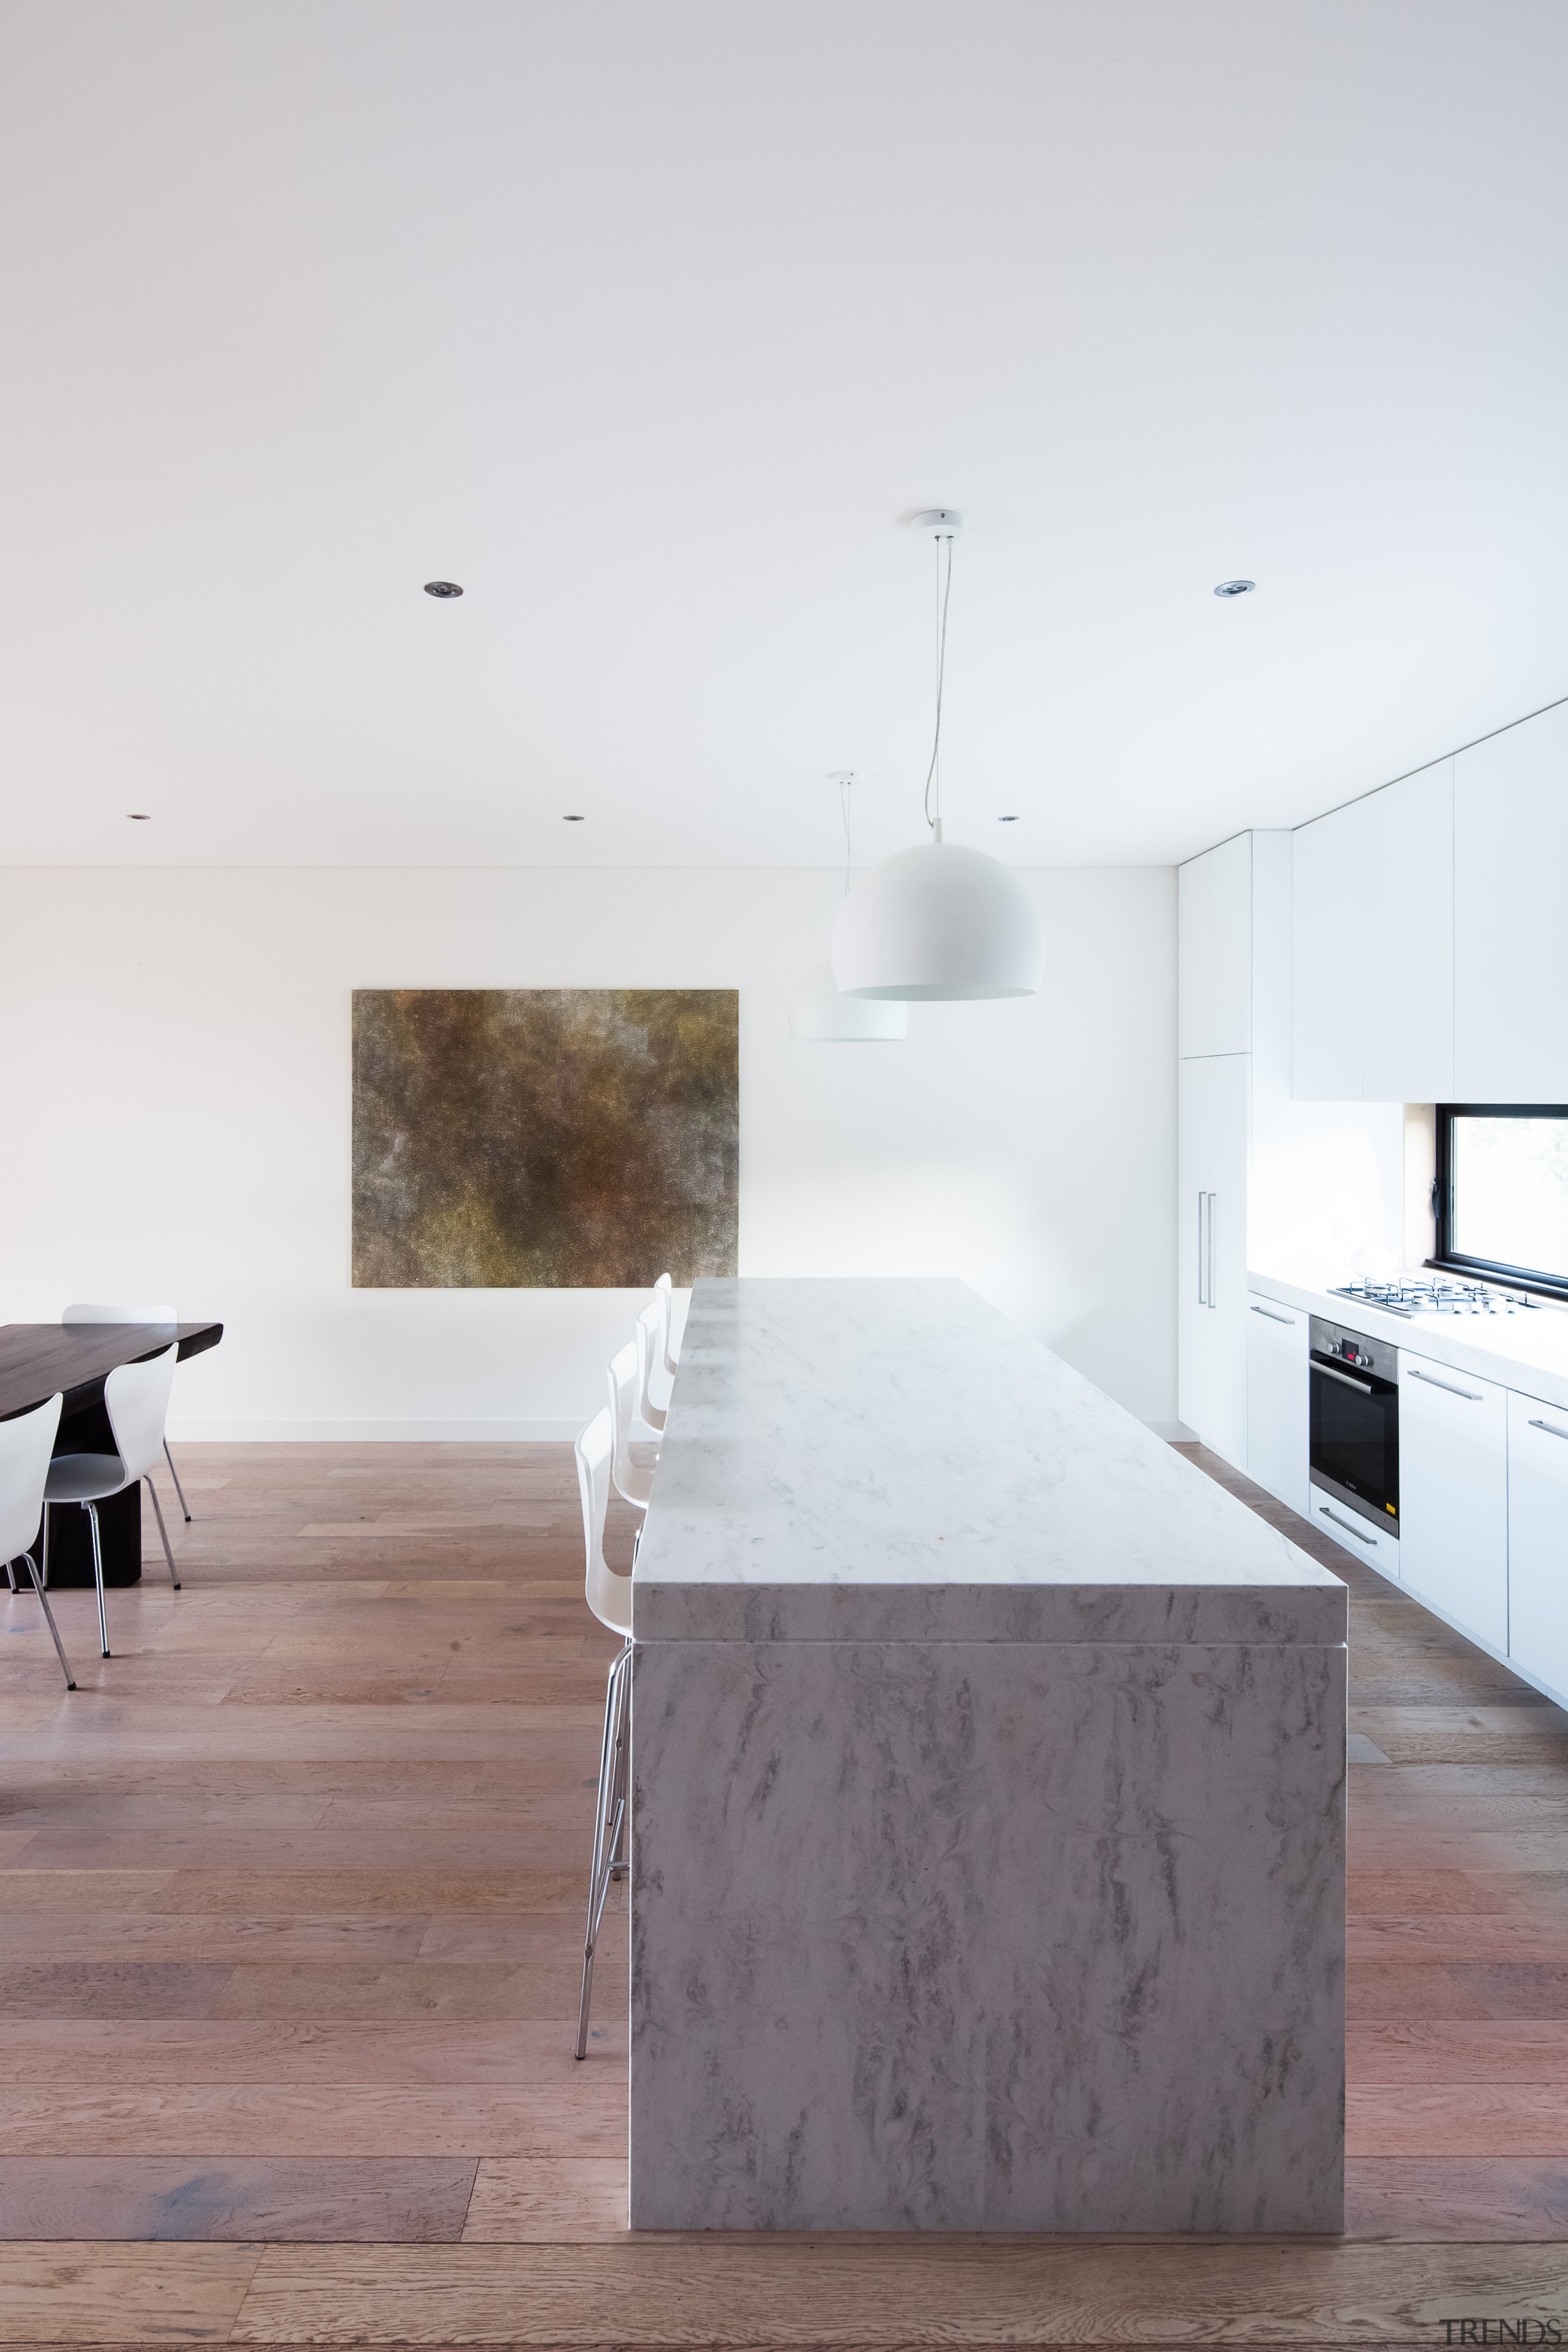 This kitchen with prominent island bench forms part architecture, building, ceiling, concrete, daylighting, design, floor, flooring, furniture, hardwood, home, house, interior design, kitchen, line, living room, loft, material property, property, room, space, table, tile, wall, white, wood, wood flooring, white, gray